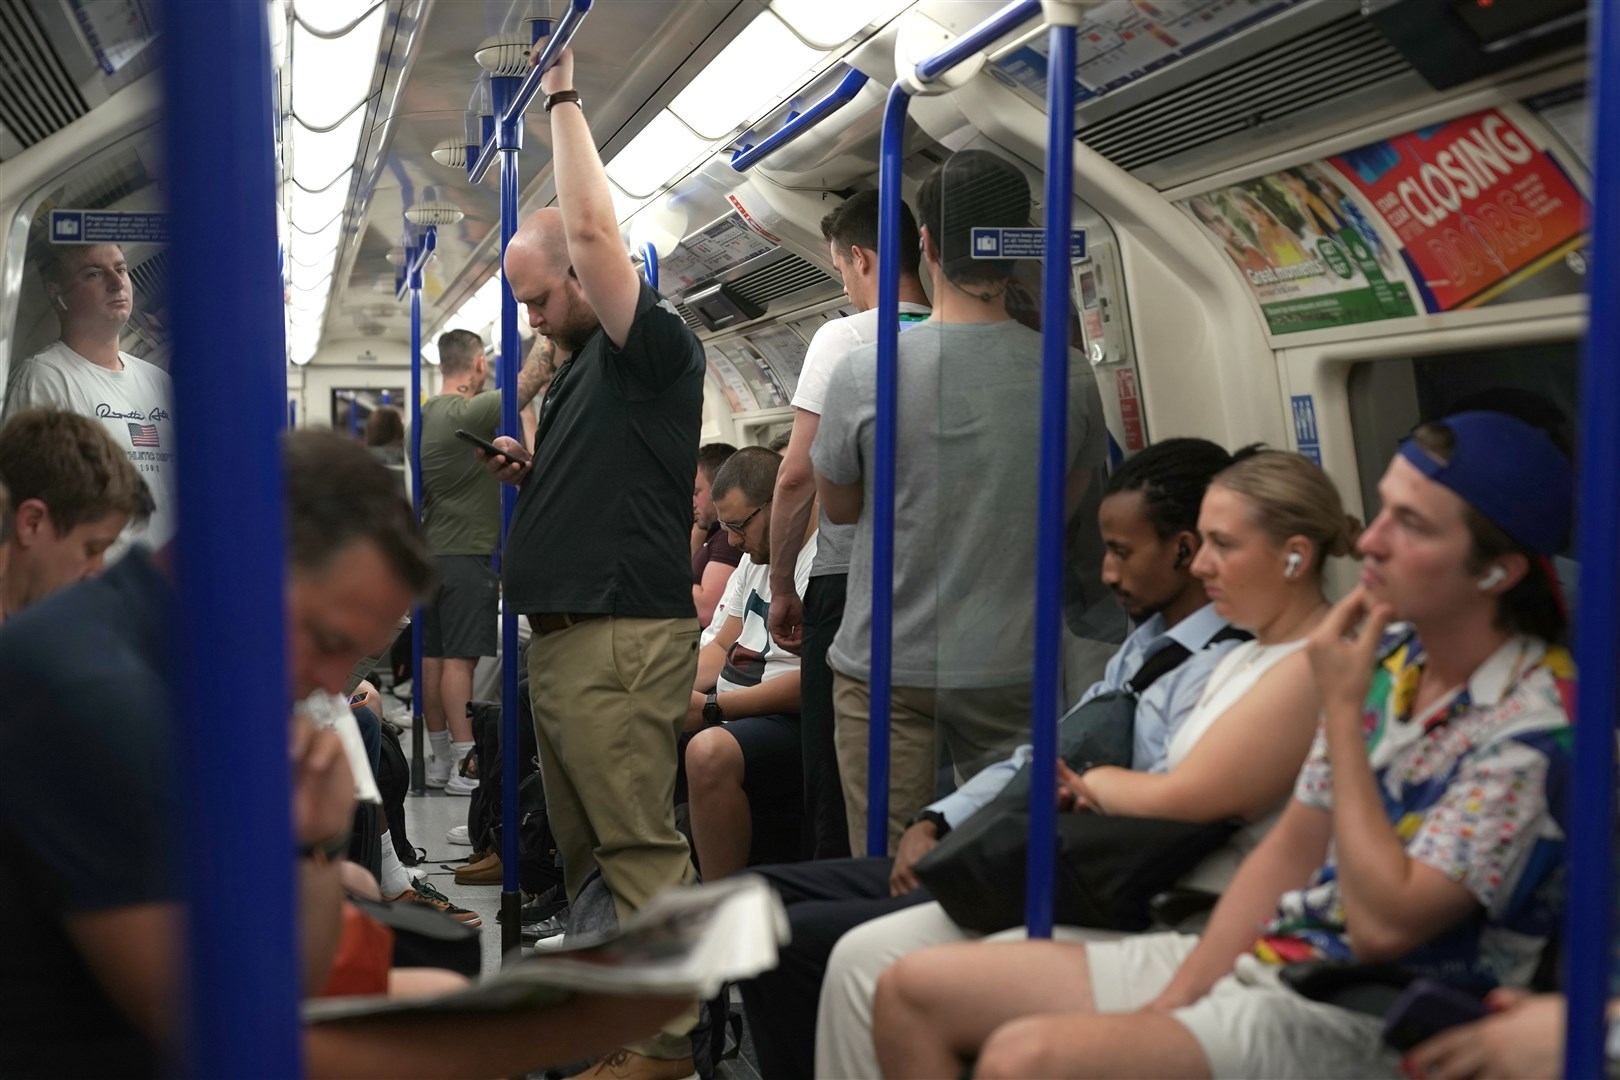 People on a Northern Line train in London as temperatures reached 40C for the first time on record in the UK (Aaron Chown/PA)